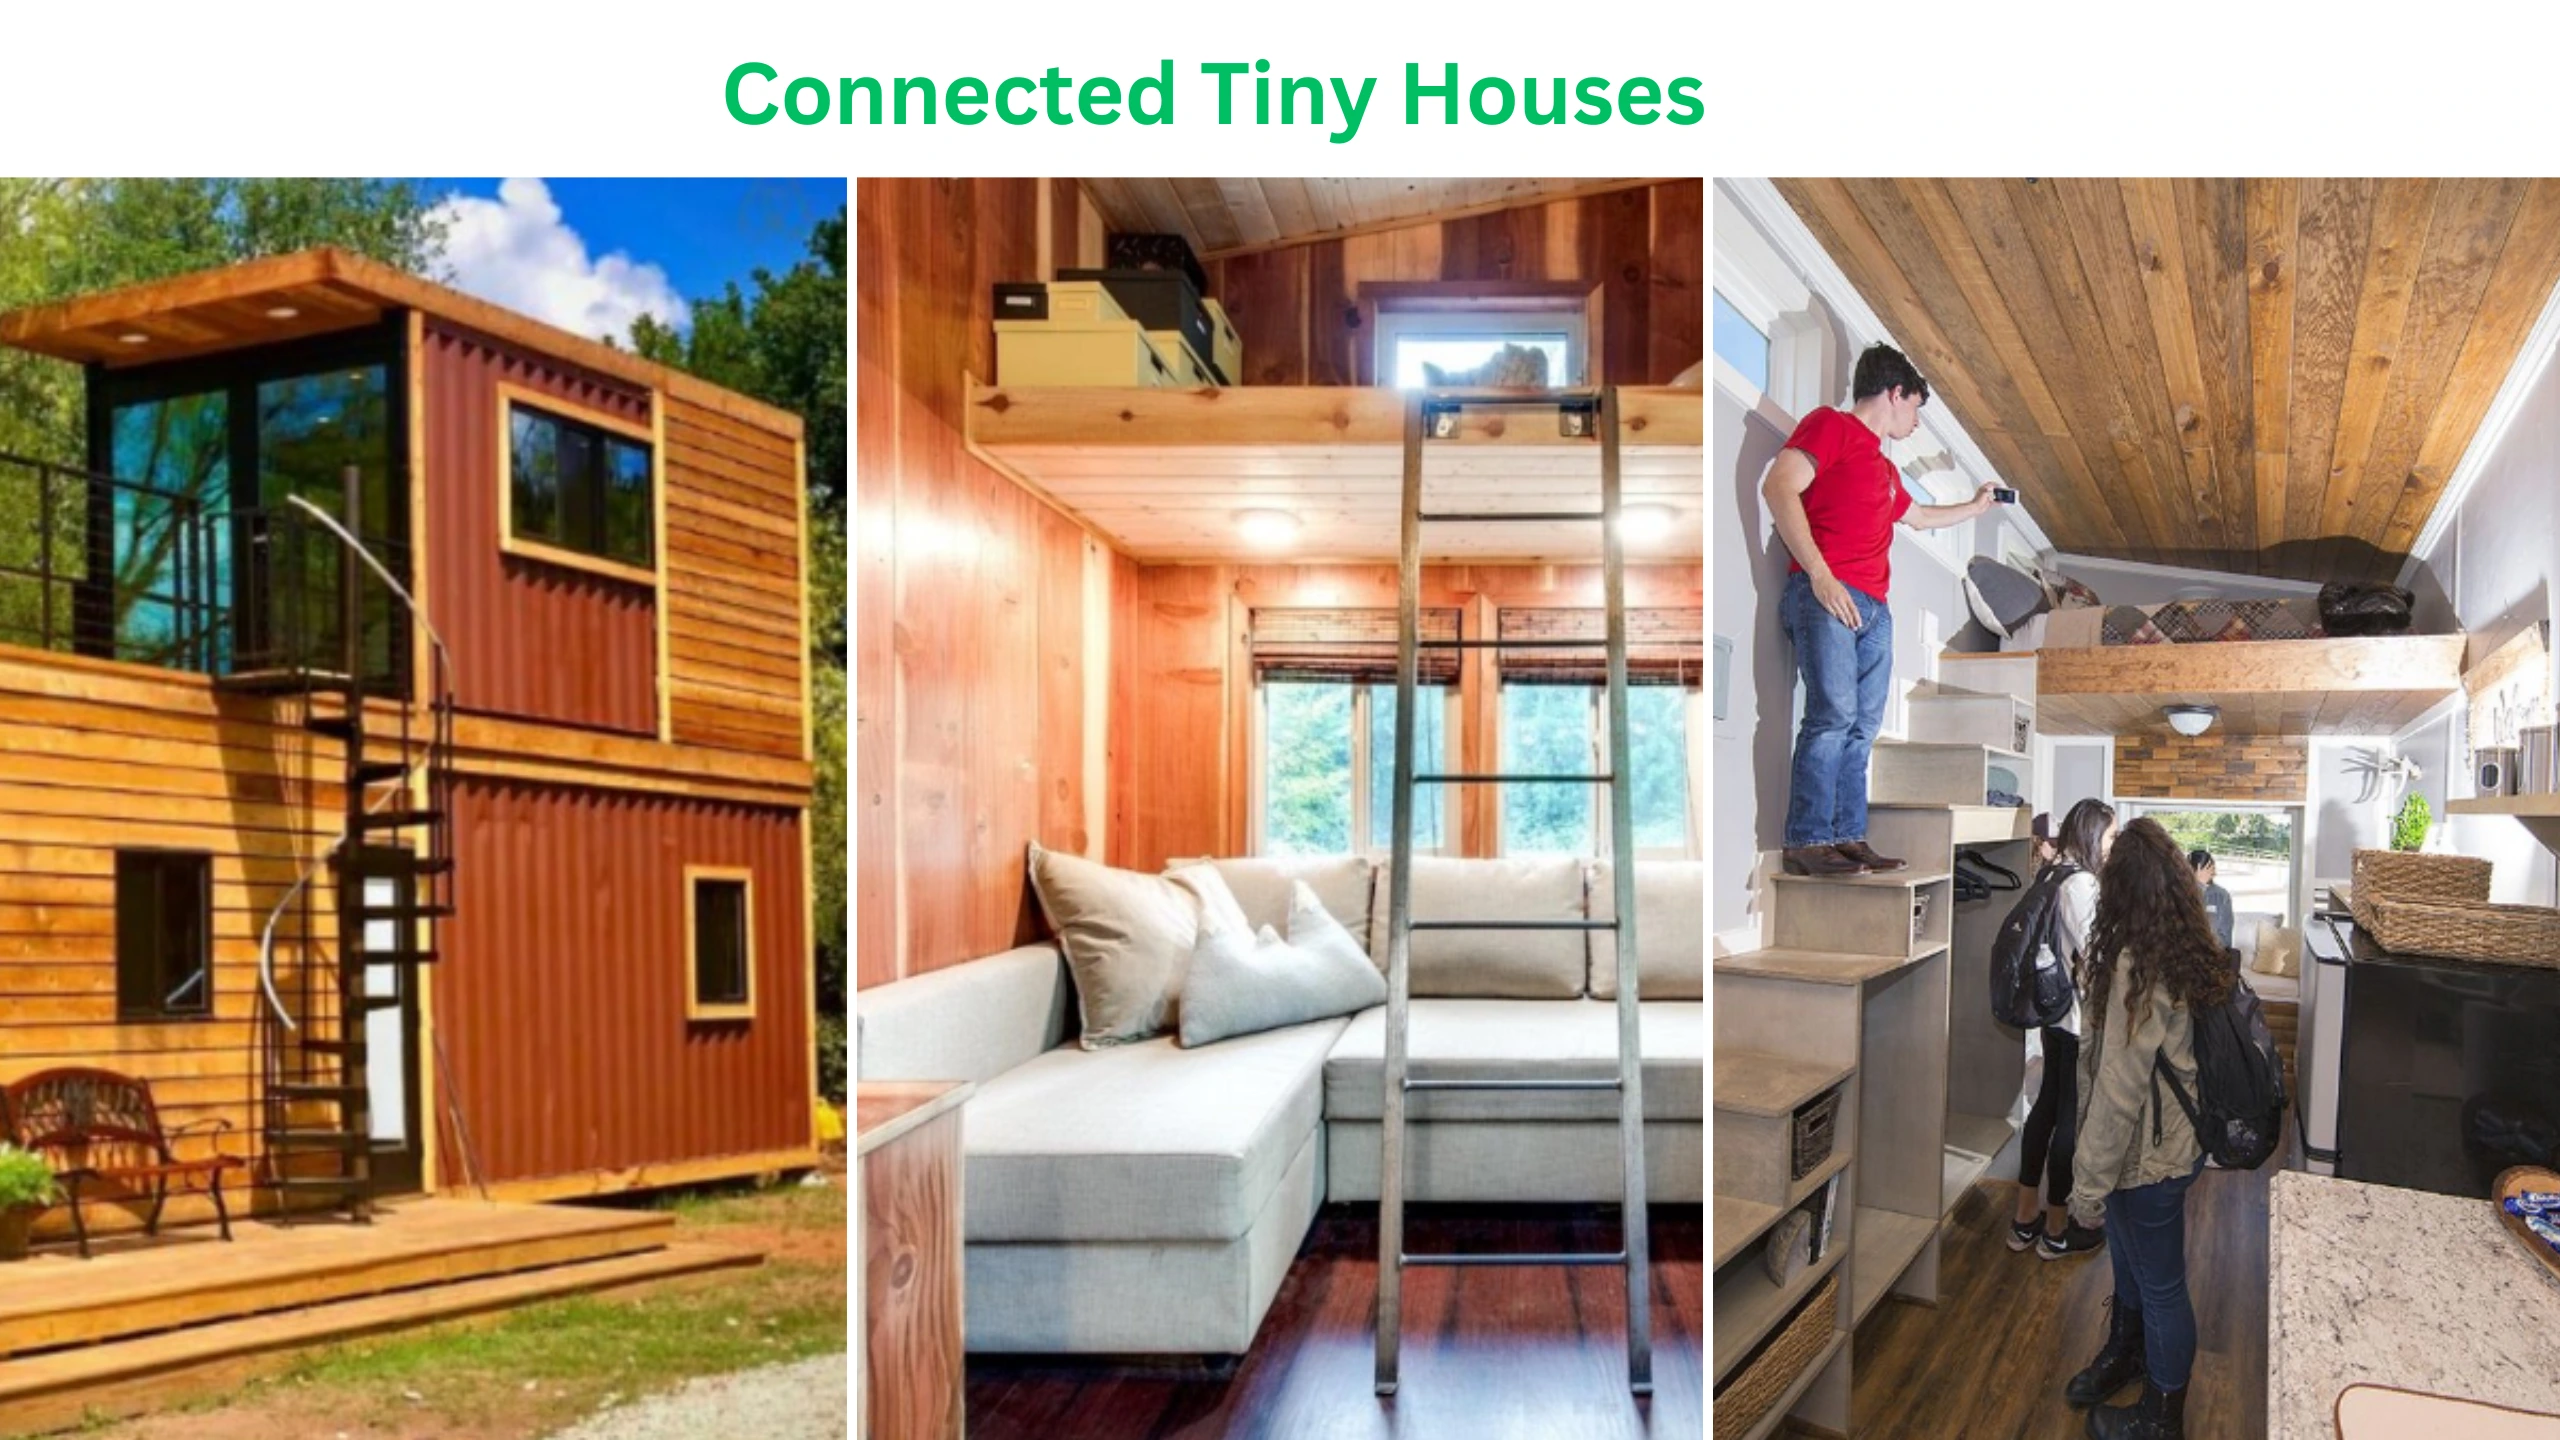 Connected tiny houses